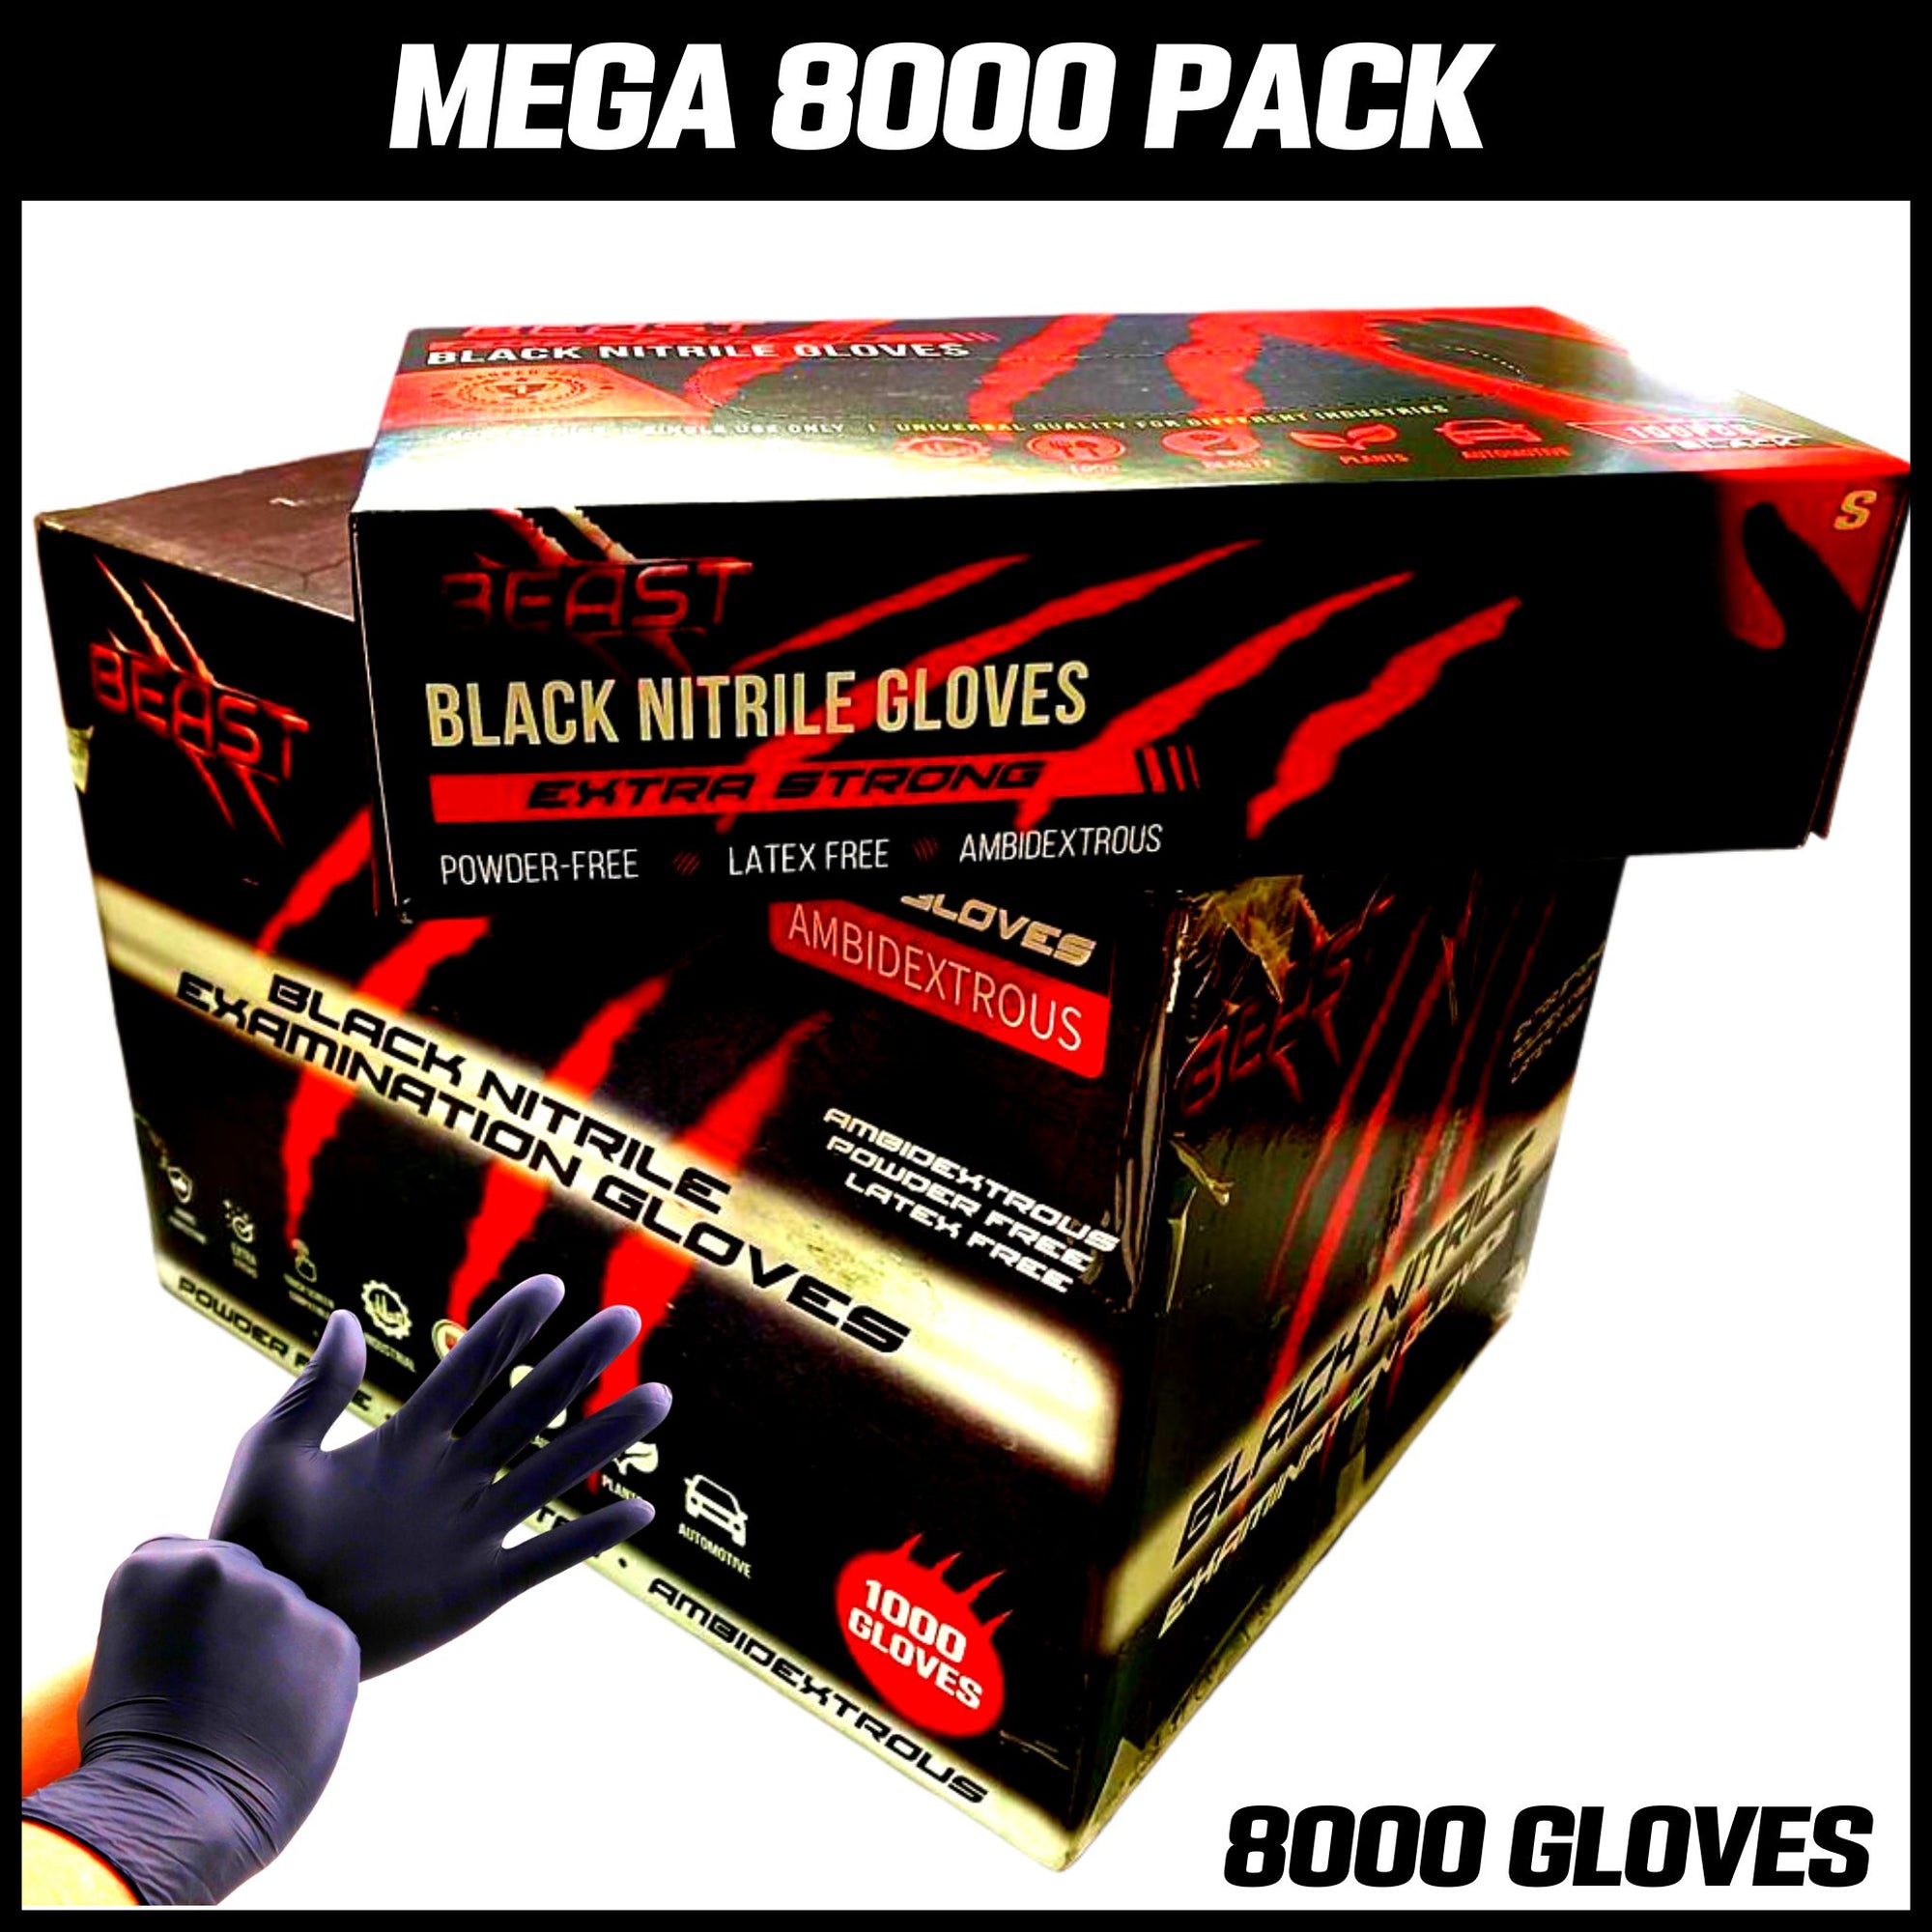 8 CARTONS - BEAST Black Nitrile Gloves - 8000 Pack - South East Clearance Centre